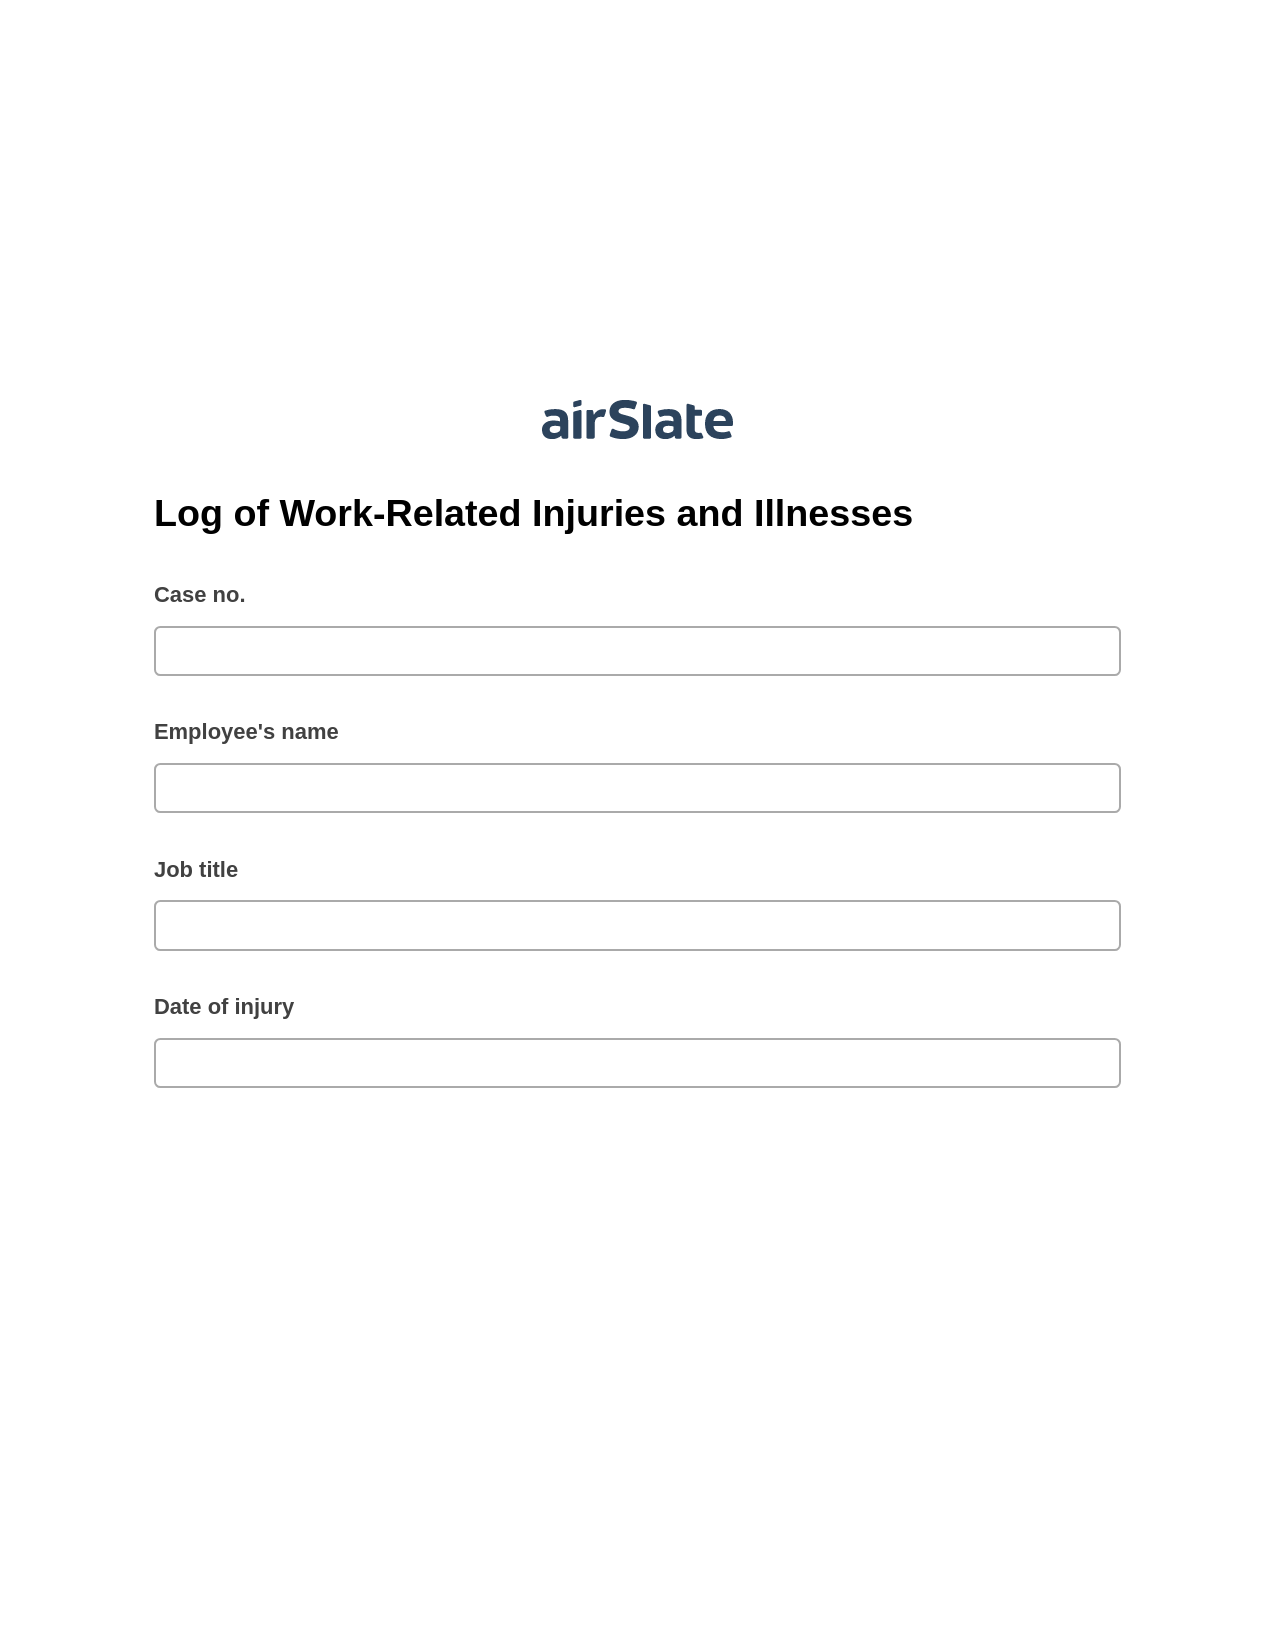 Log of Work-Related Injuries and Illnesses Pre-fill from Salesforce Record Bot, Slack Notification Bot, Export to Smartsheet